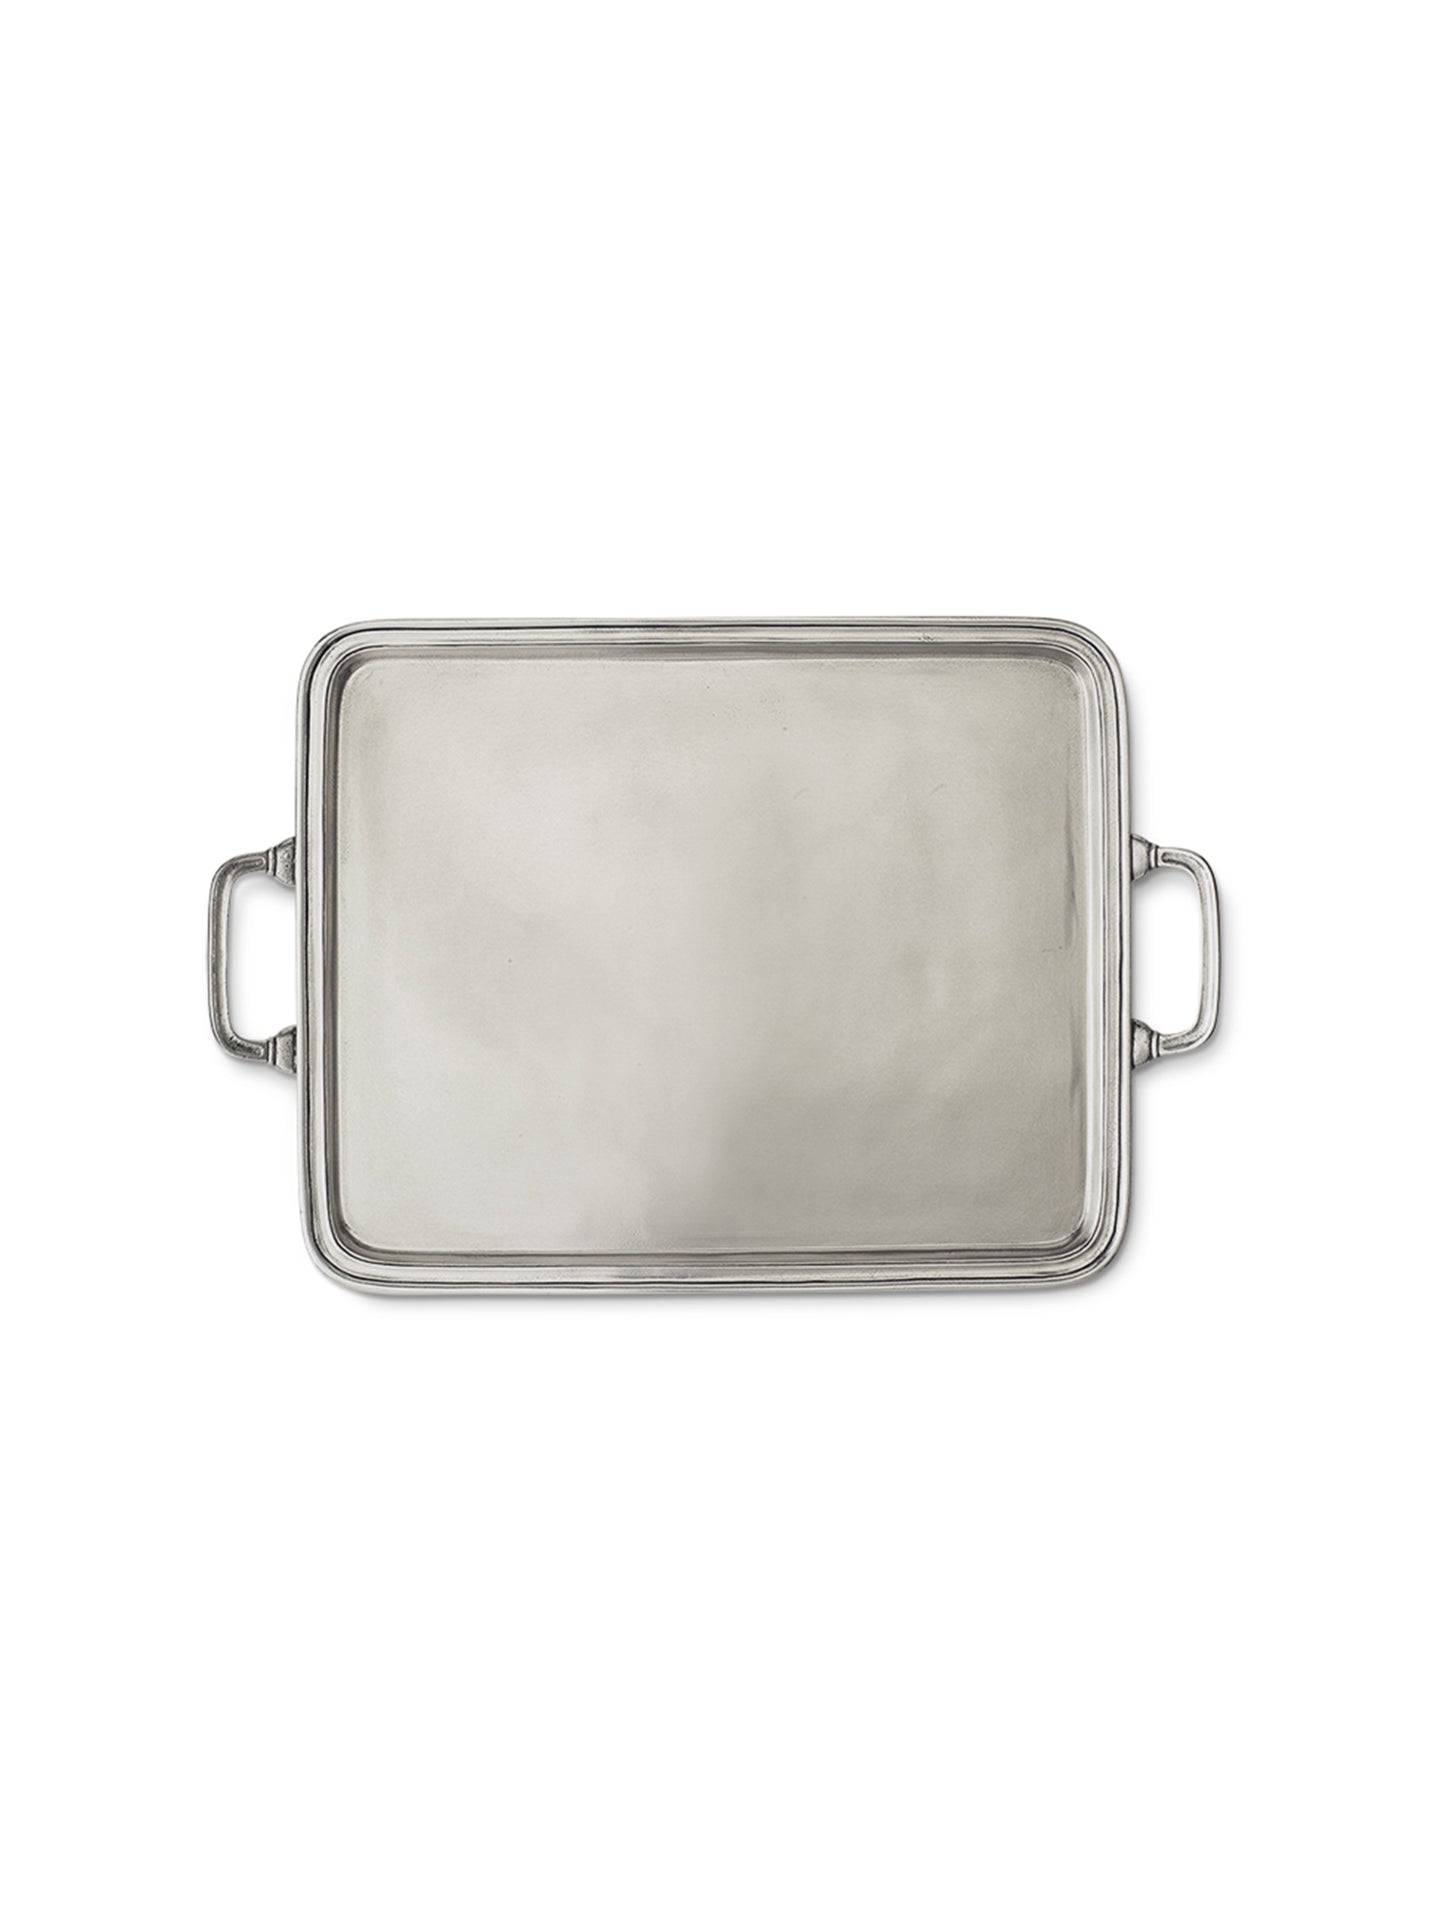 MATCH Pewter Rectangle Trays with Handles Large Weston Table